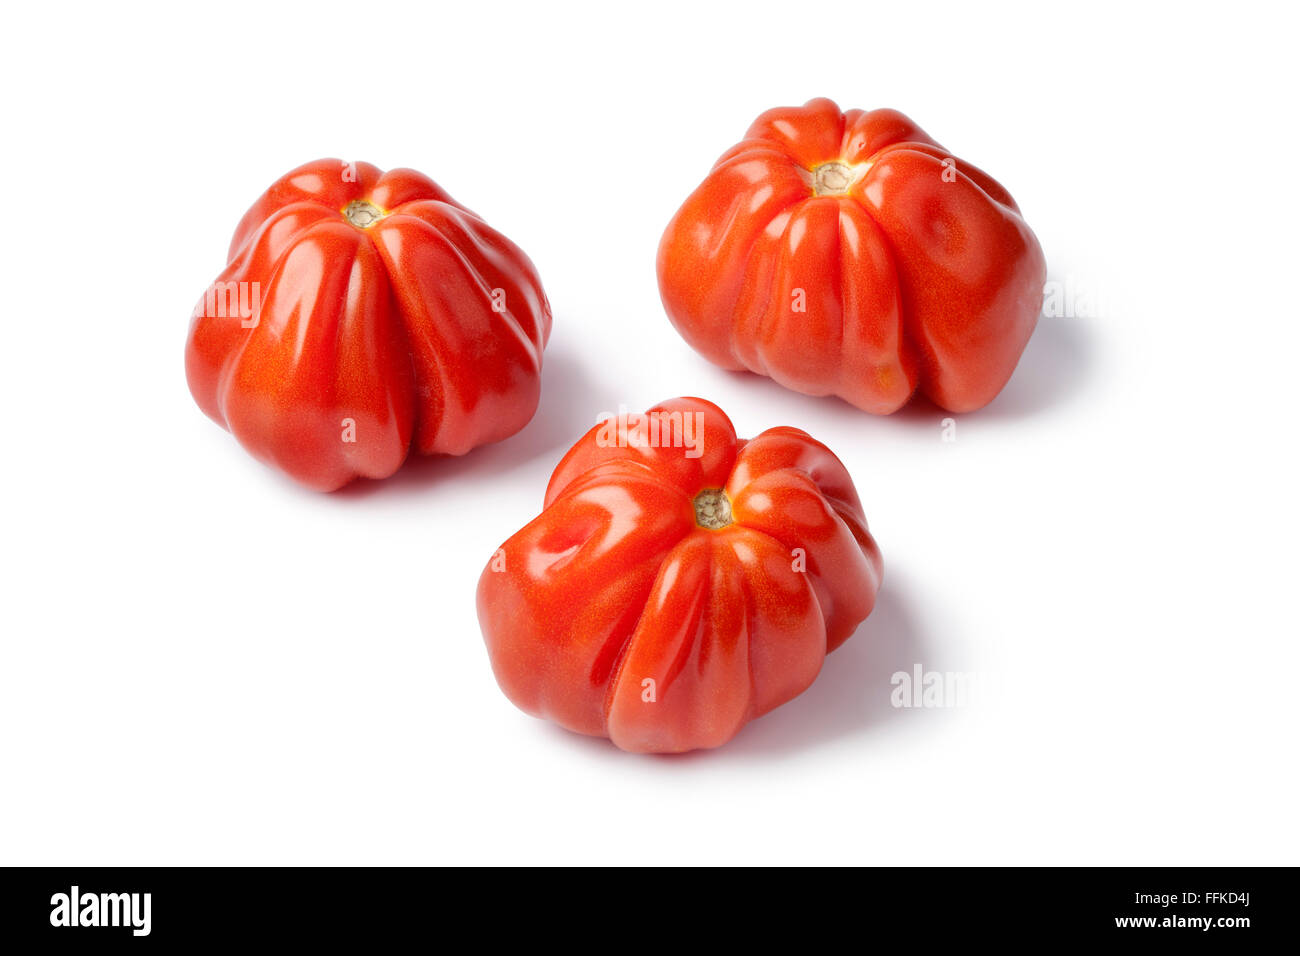 Fresh red Coeur de boeuff tomatoes on white background Stock Photo